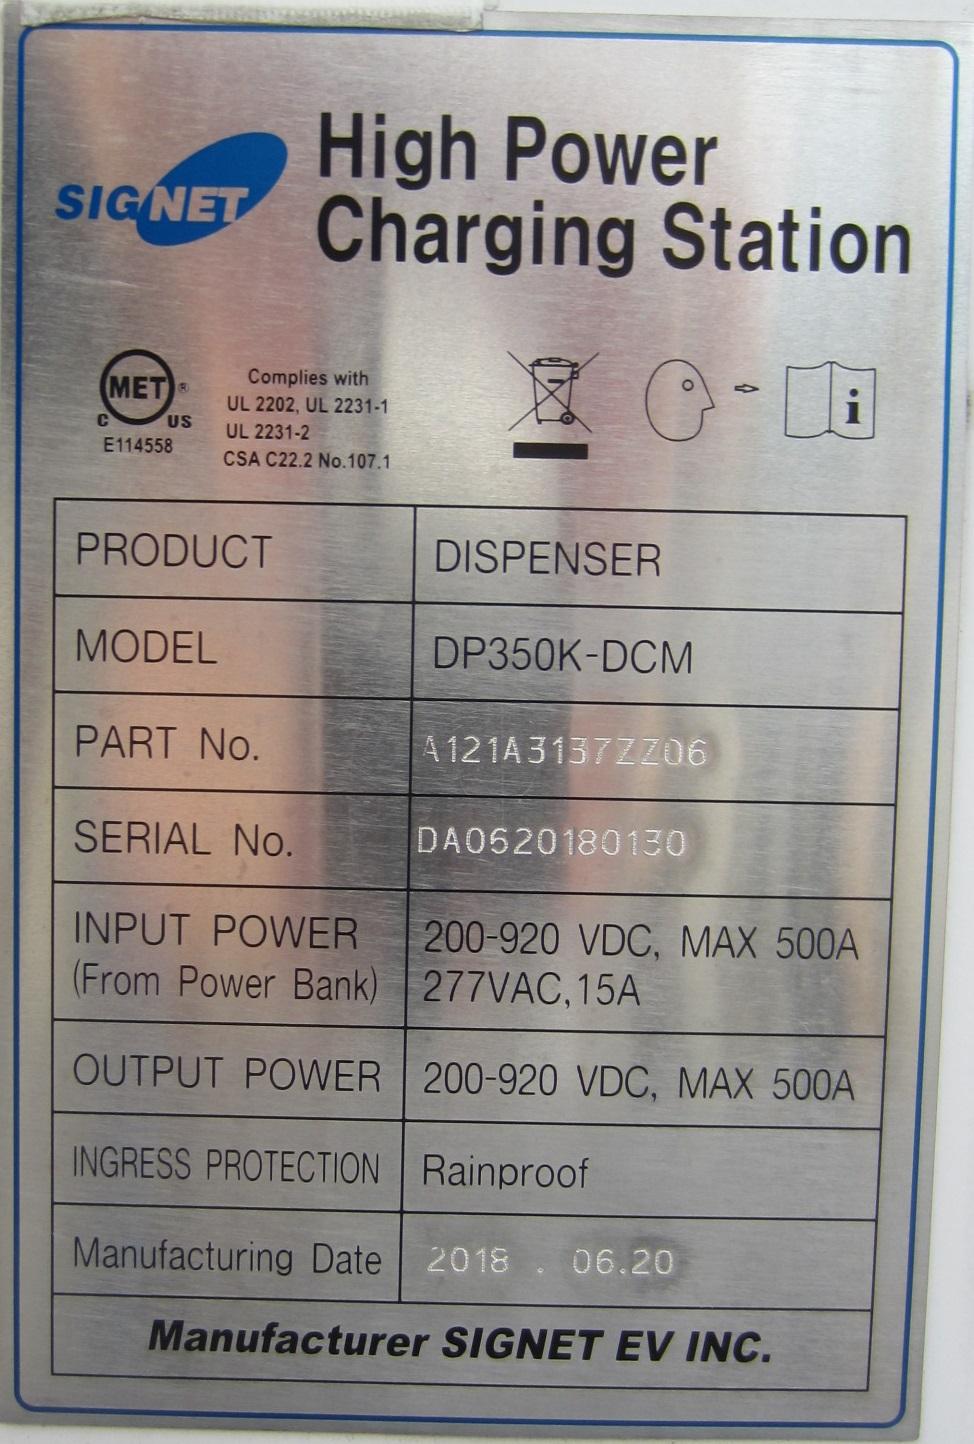 A close up of a charging station

Description automatically generated